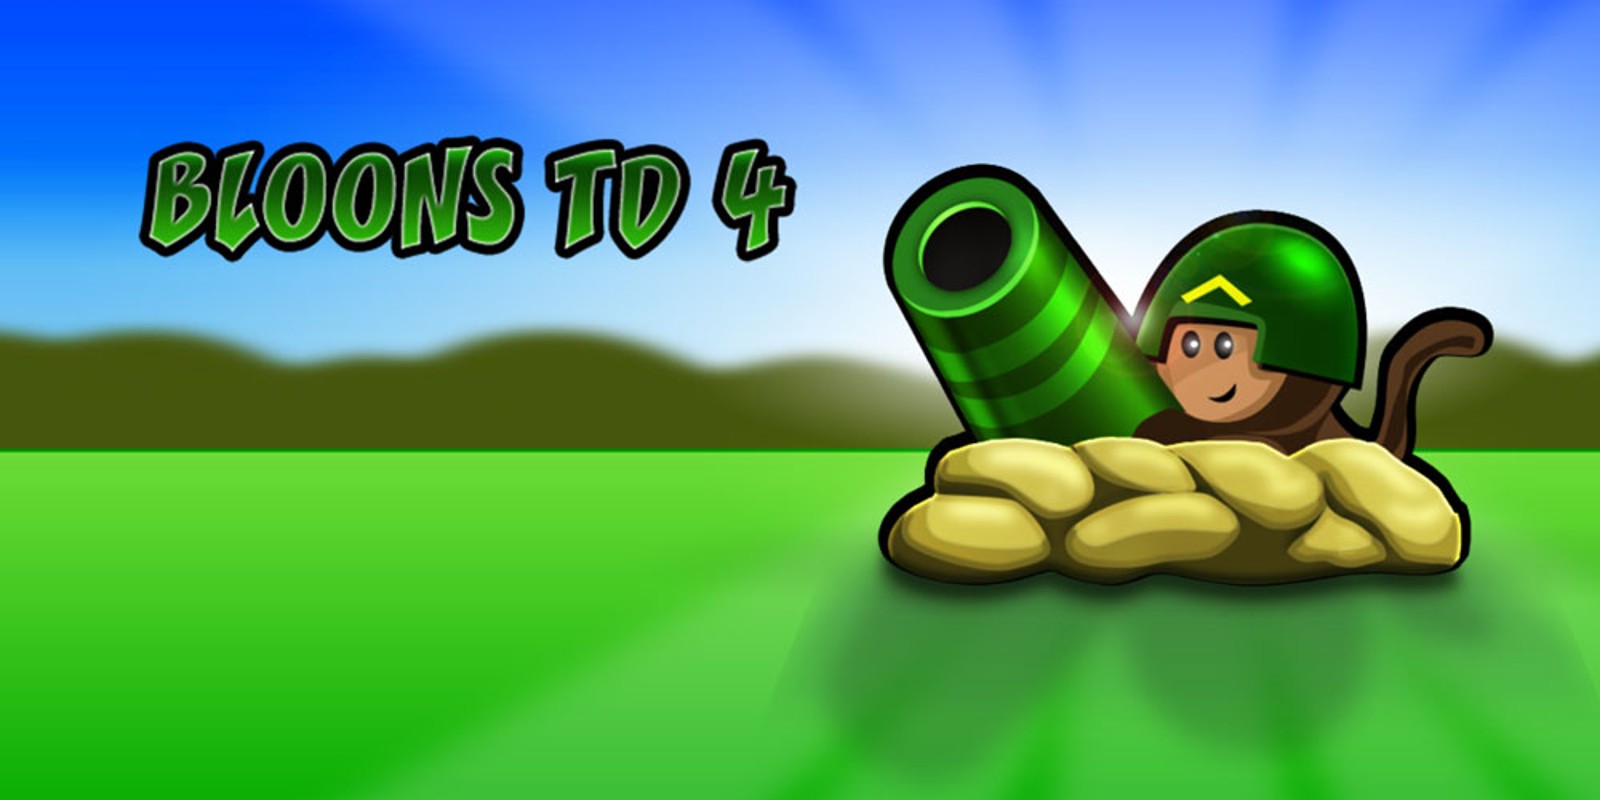 Bloons Td 4 